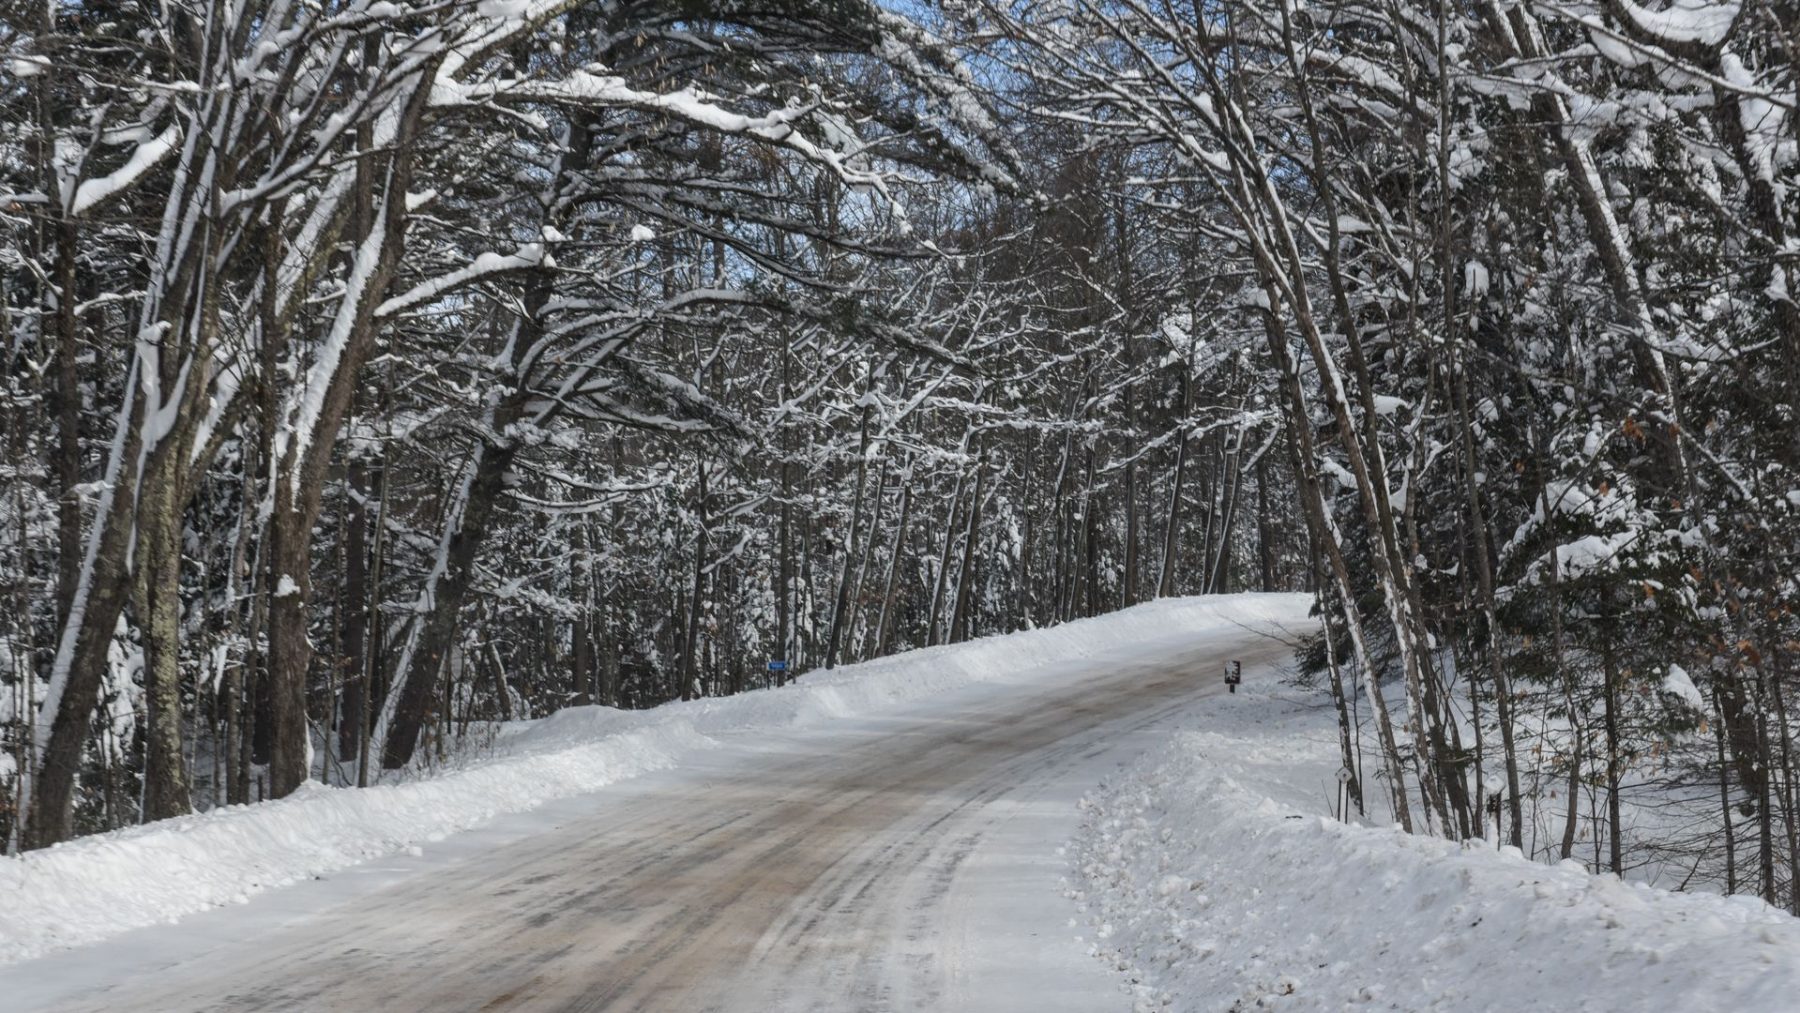 Article: Don’t miss these scenic winter drives